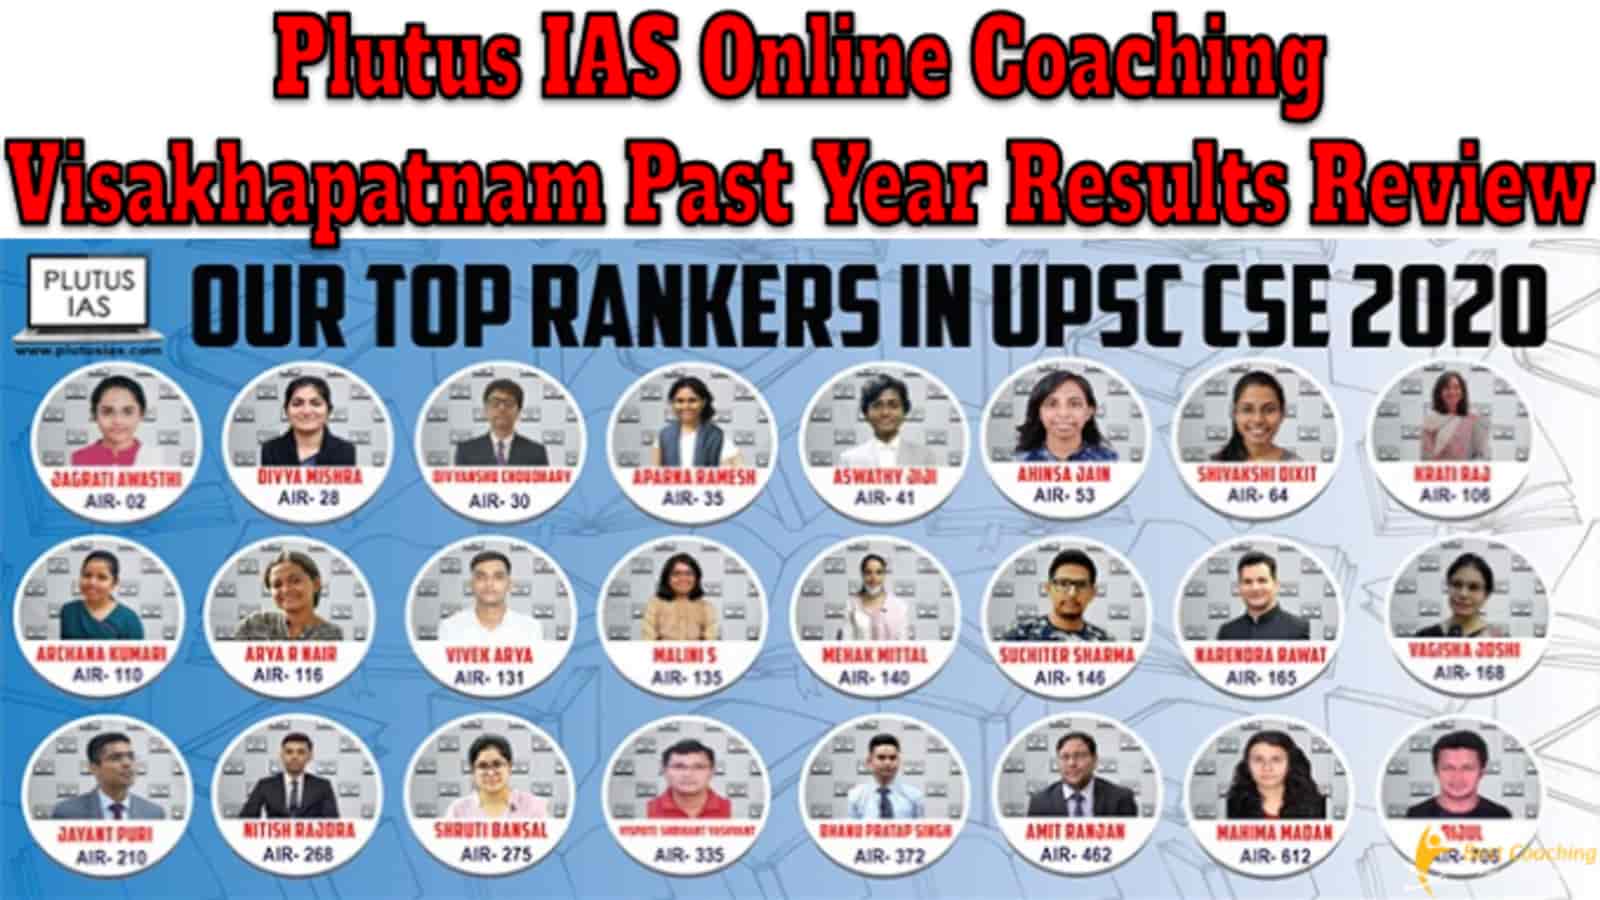 Plutus IAS Online Coaching Visakhapatnam Past Year Results Review